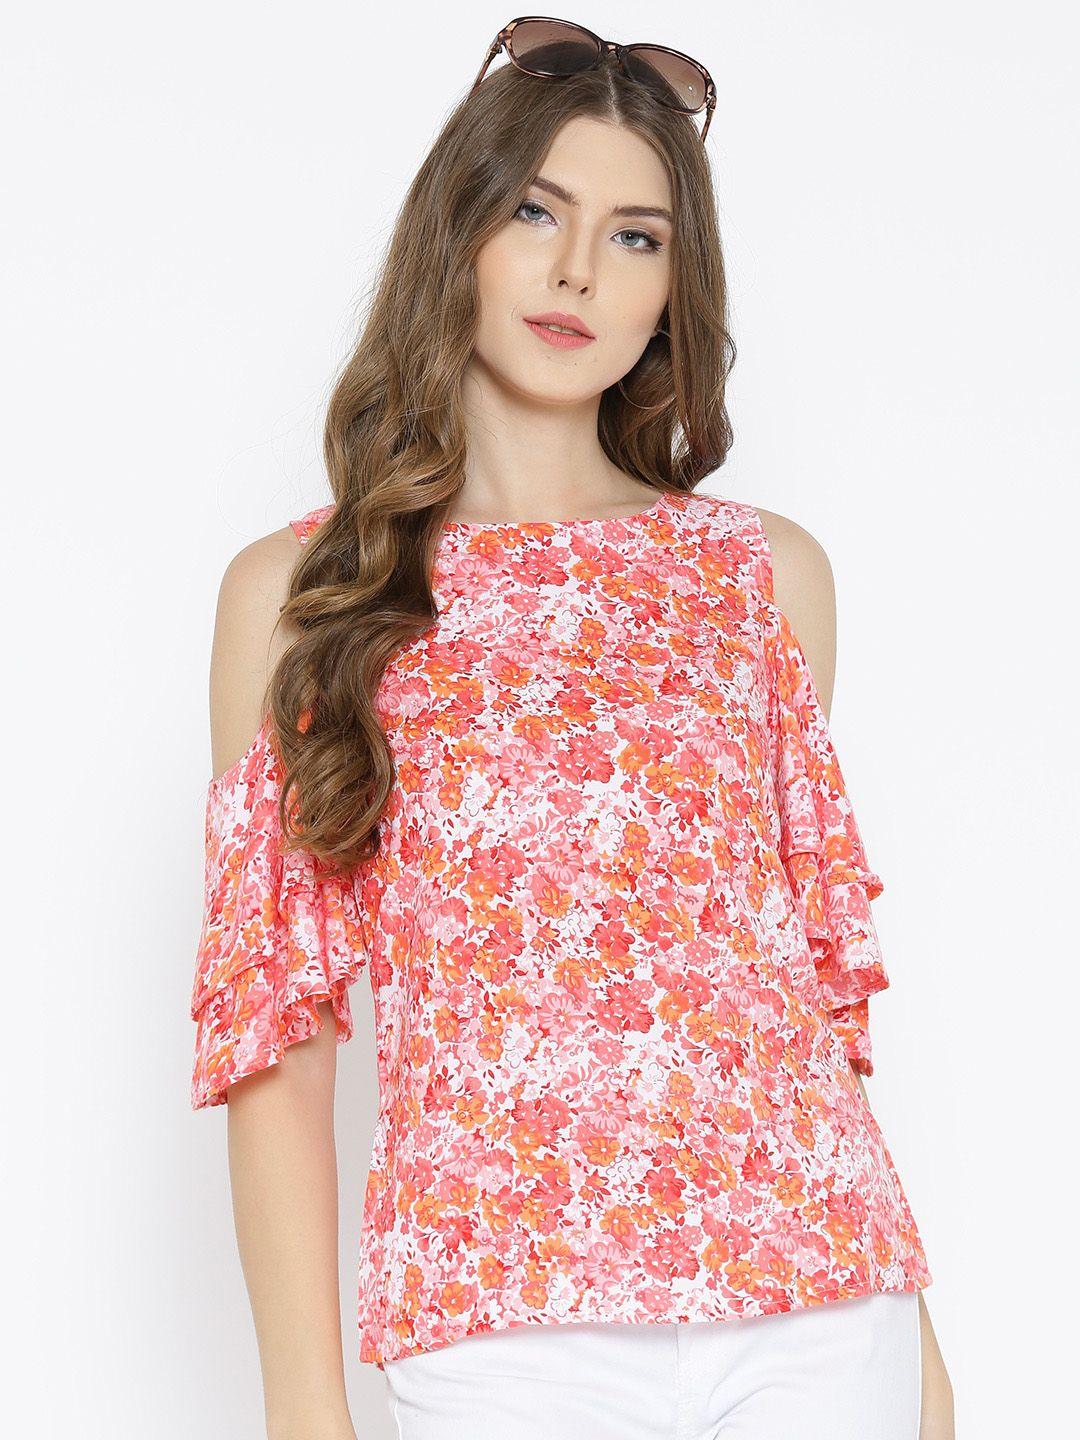 sera-women-off-white-&-pink-floral-printed-cold-shoulder-pure-cotton-top